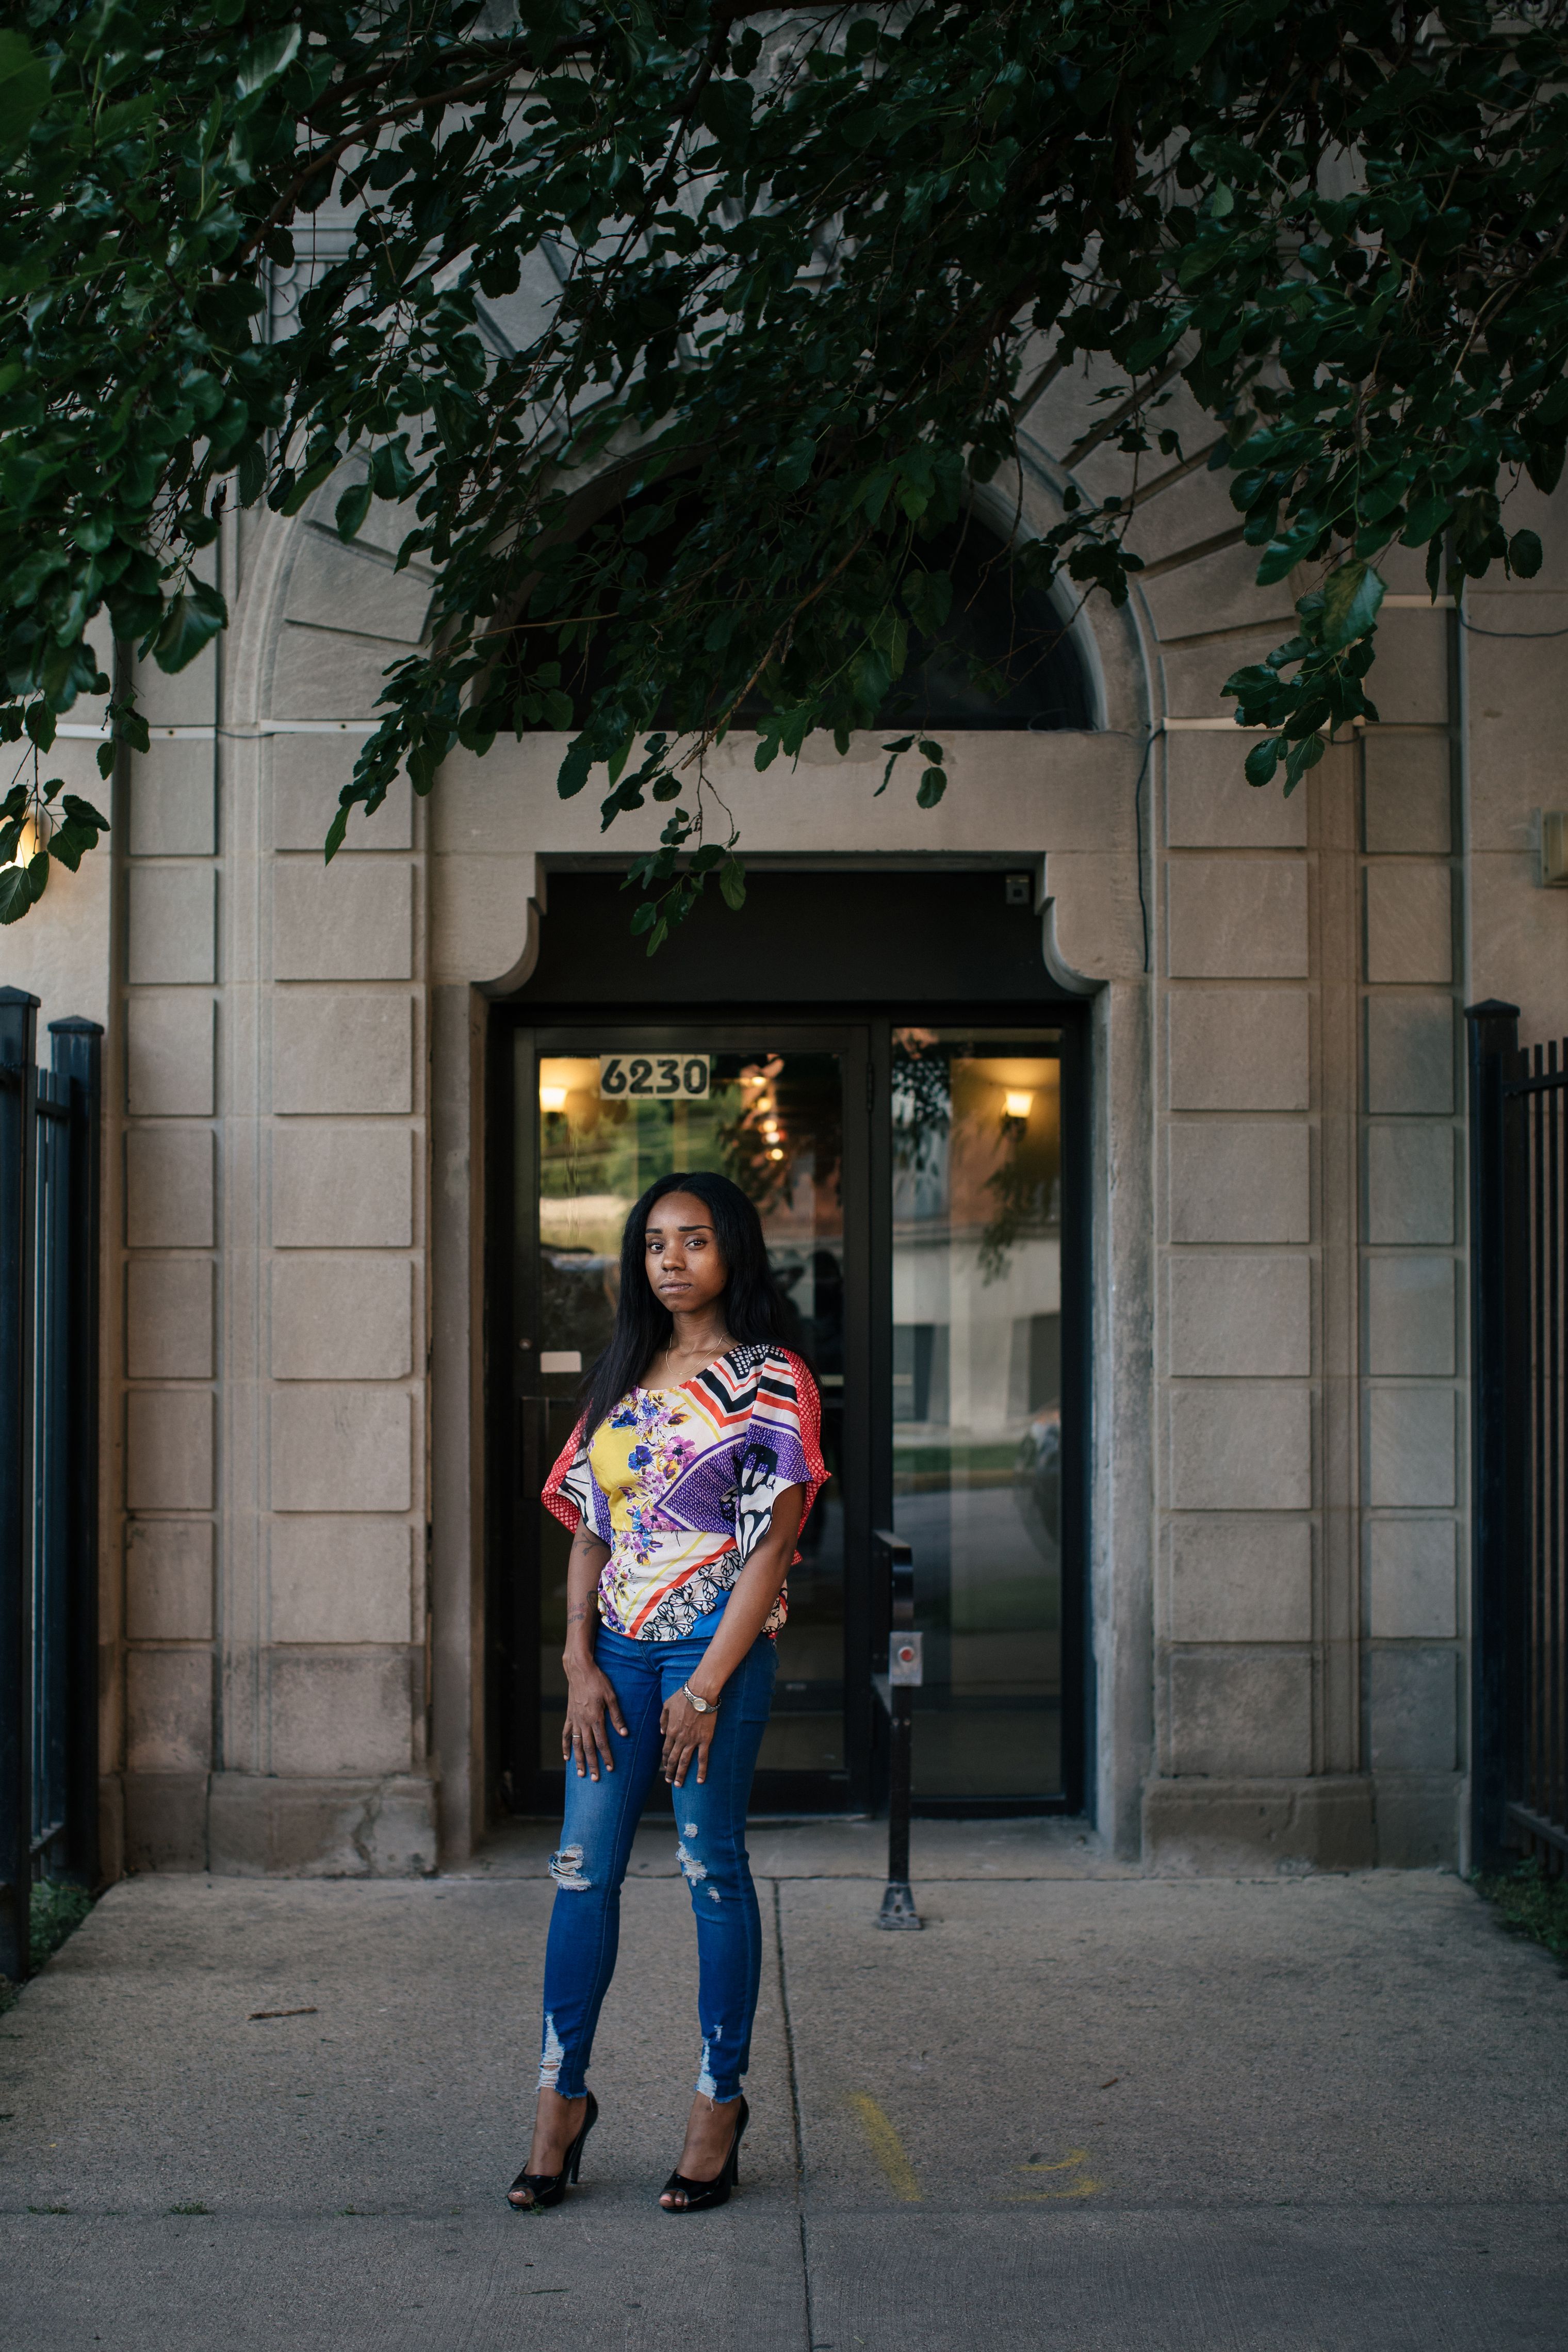 Kyana Butler, who lives in Woodlawn, said her rent went up $100 per month since the announcement of the Obama Presidential Center in the adjacent Jackson Park. Butler, her fiancé and their daughter will move this summer. (Alyssa Schukar for TIME)